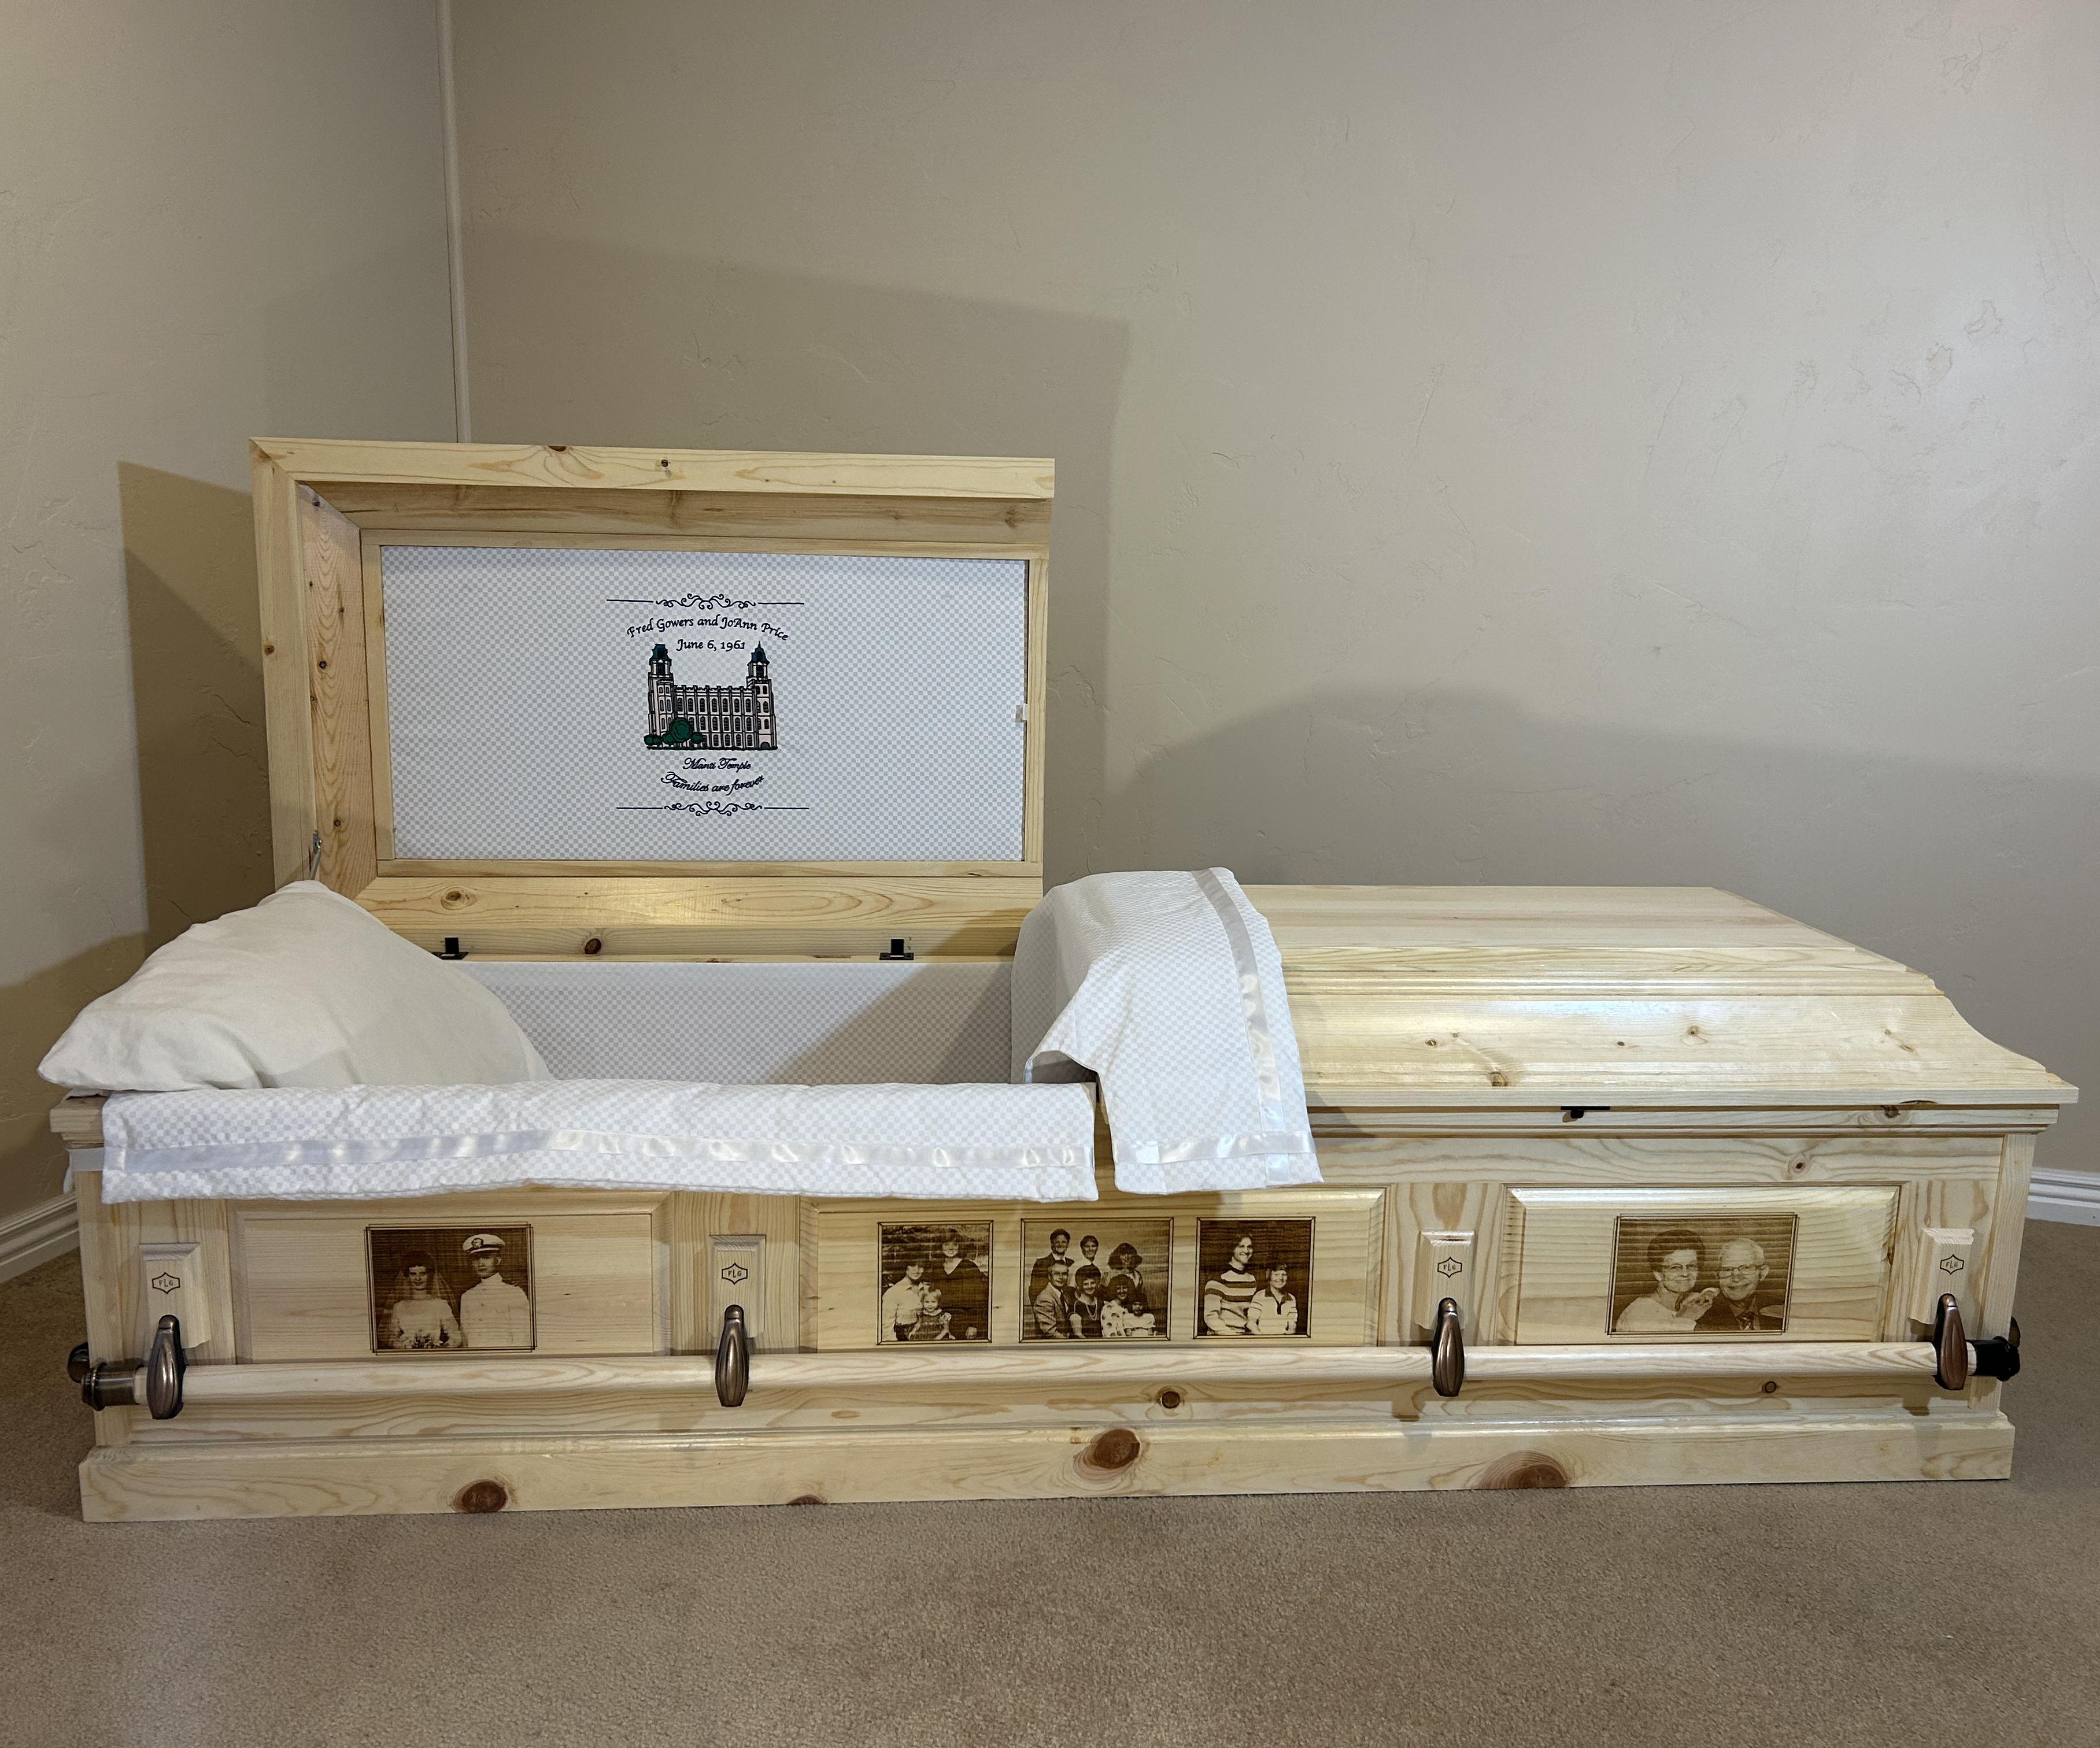 Building a Casket - a Pine Box Tribute to My Father